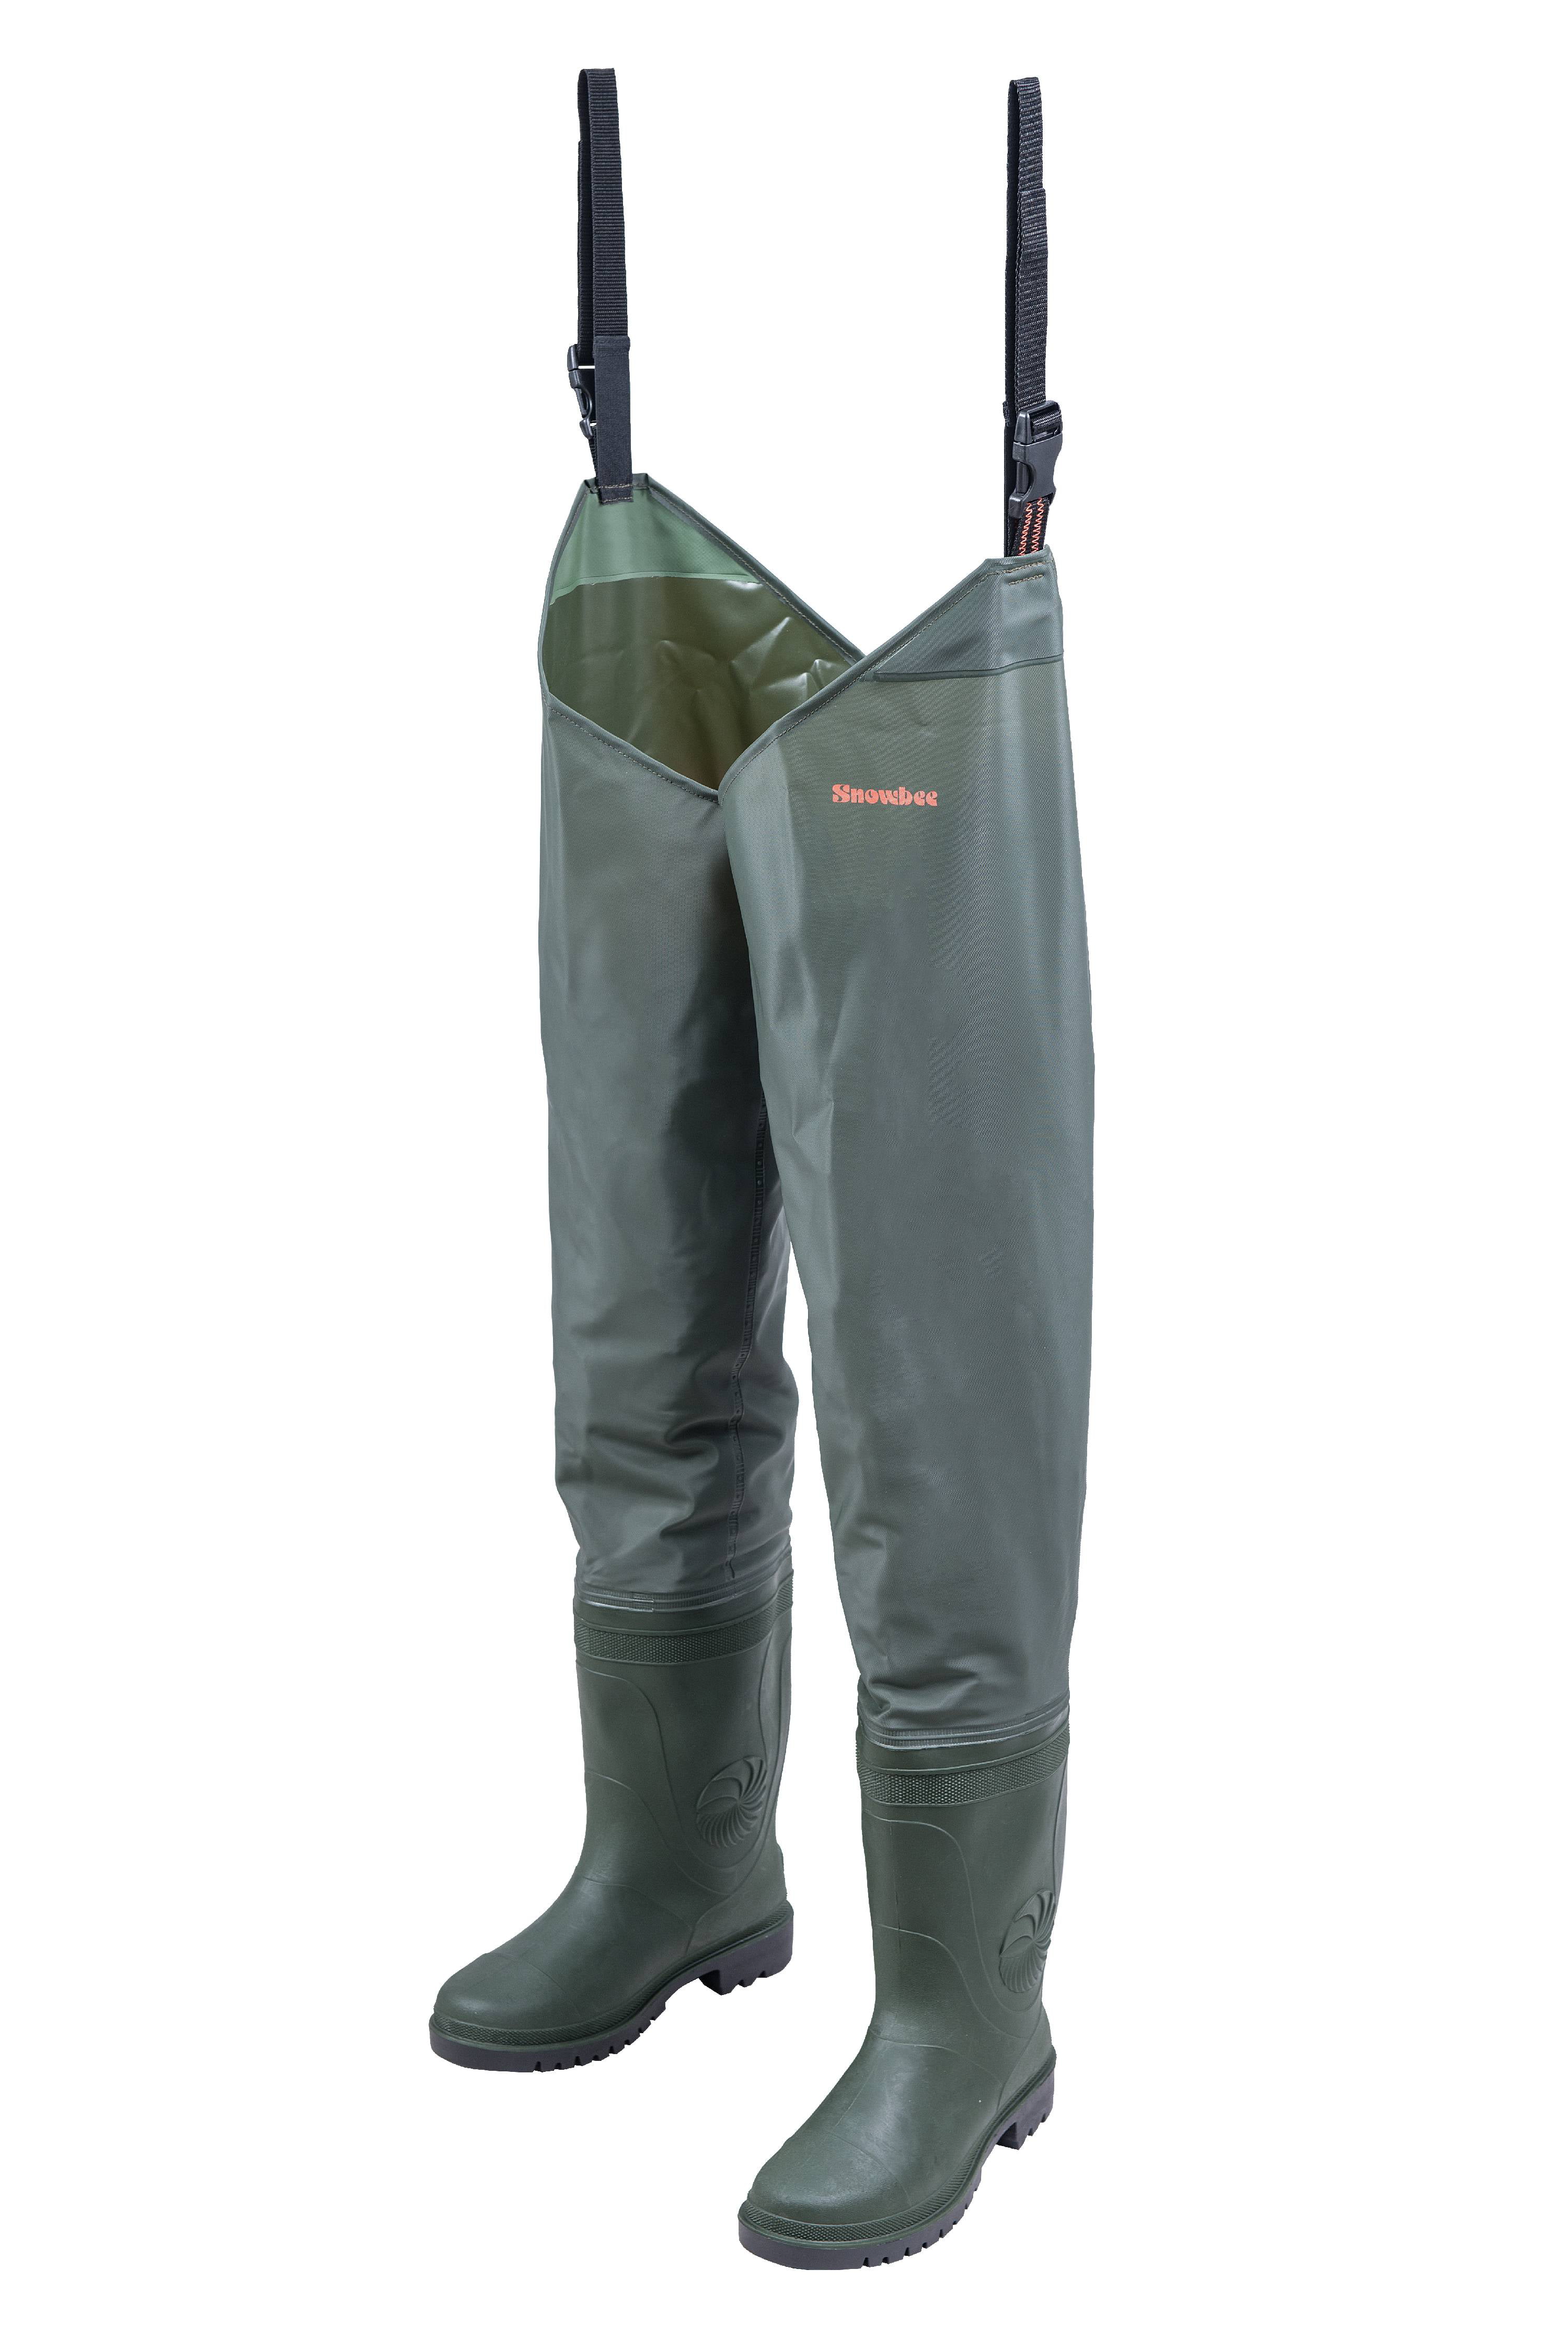 SNOWBEE Granite PVC Fishing Chest Waders Cleated Sole All Sizes 